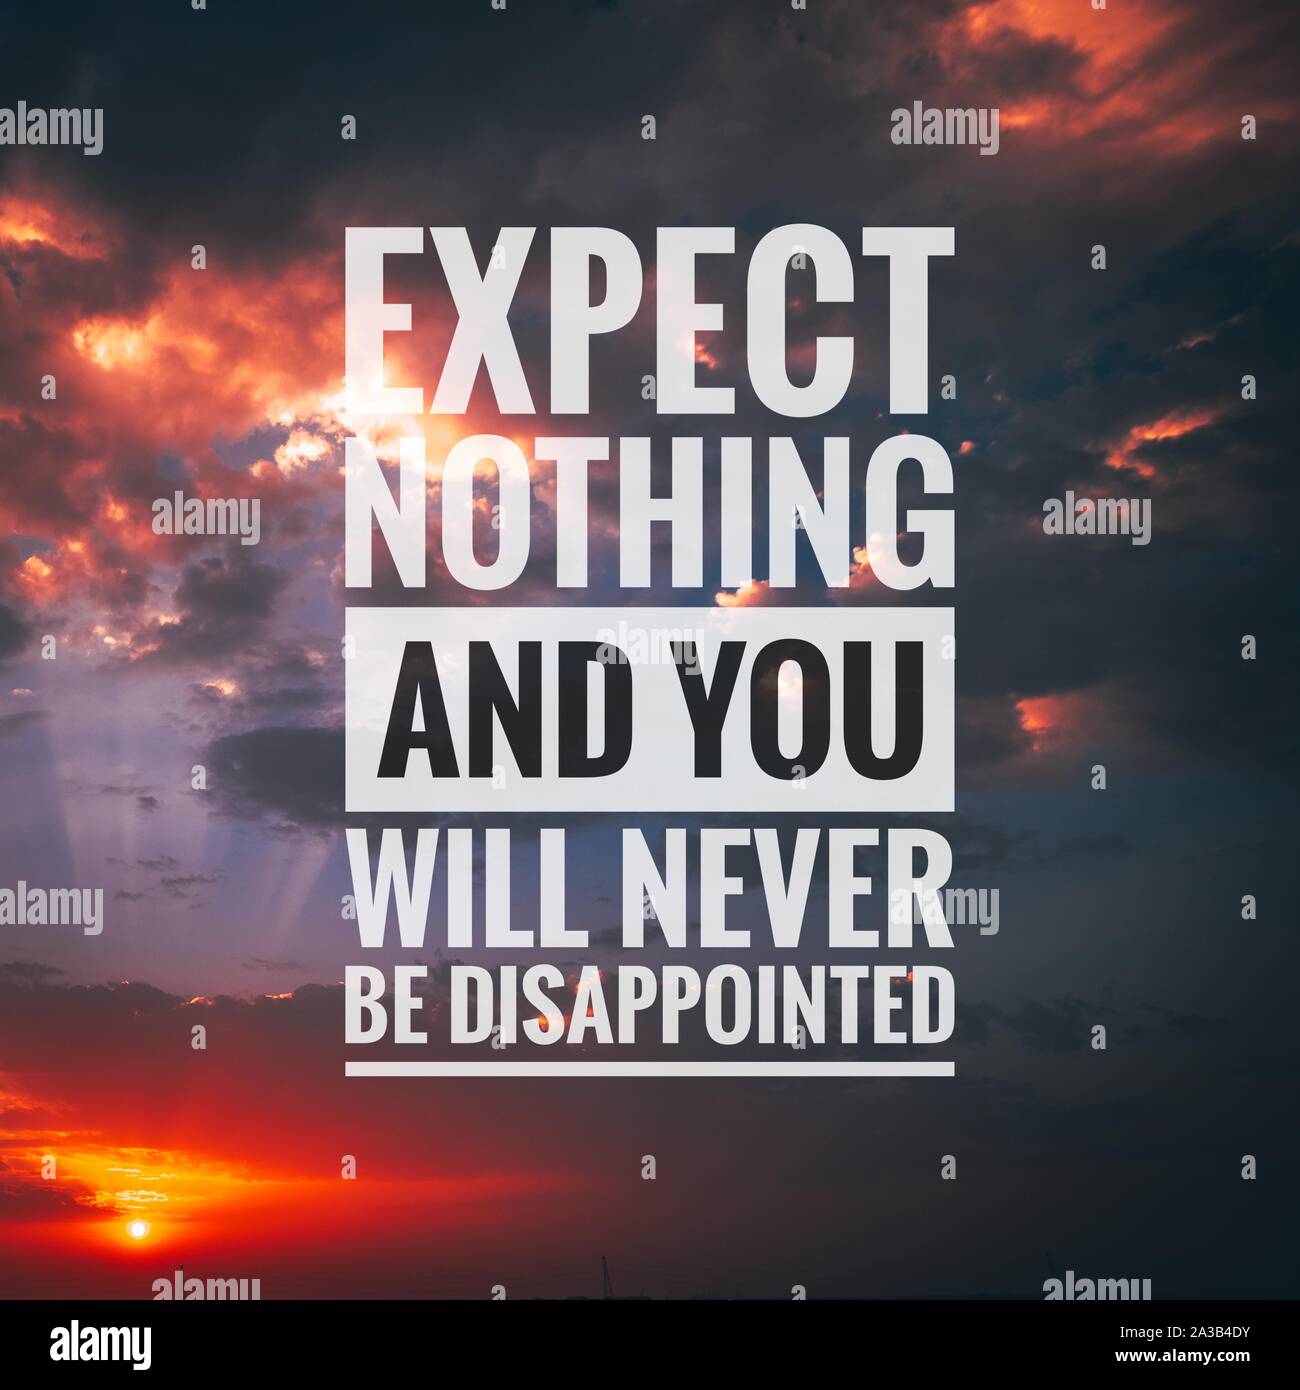 motivational-and-inspirational-quote-expect-nothing-and-you-will-never-be-disappointed-2A3B4DY.jpg